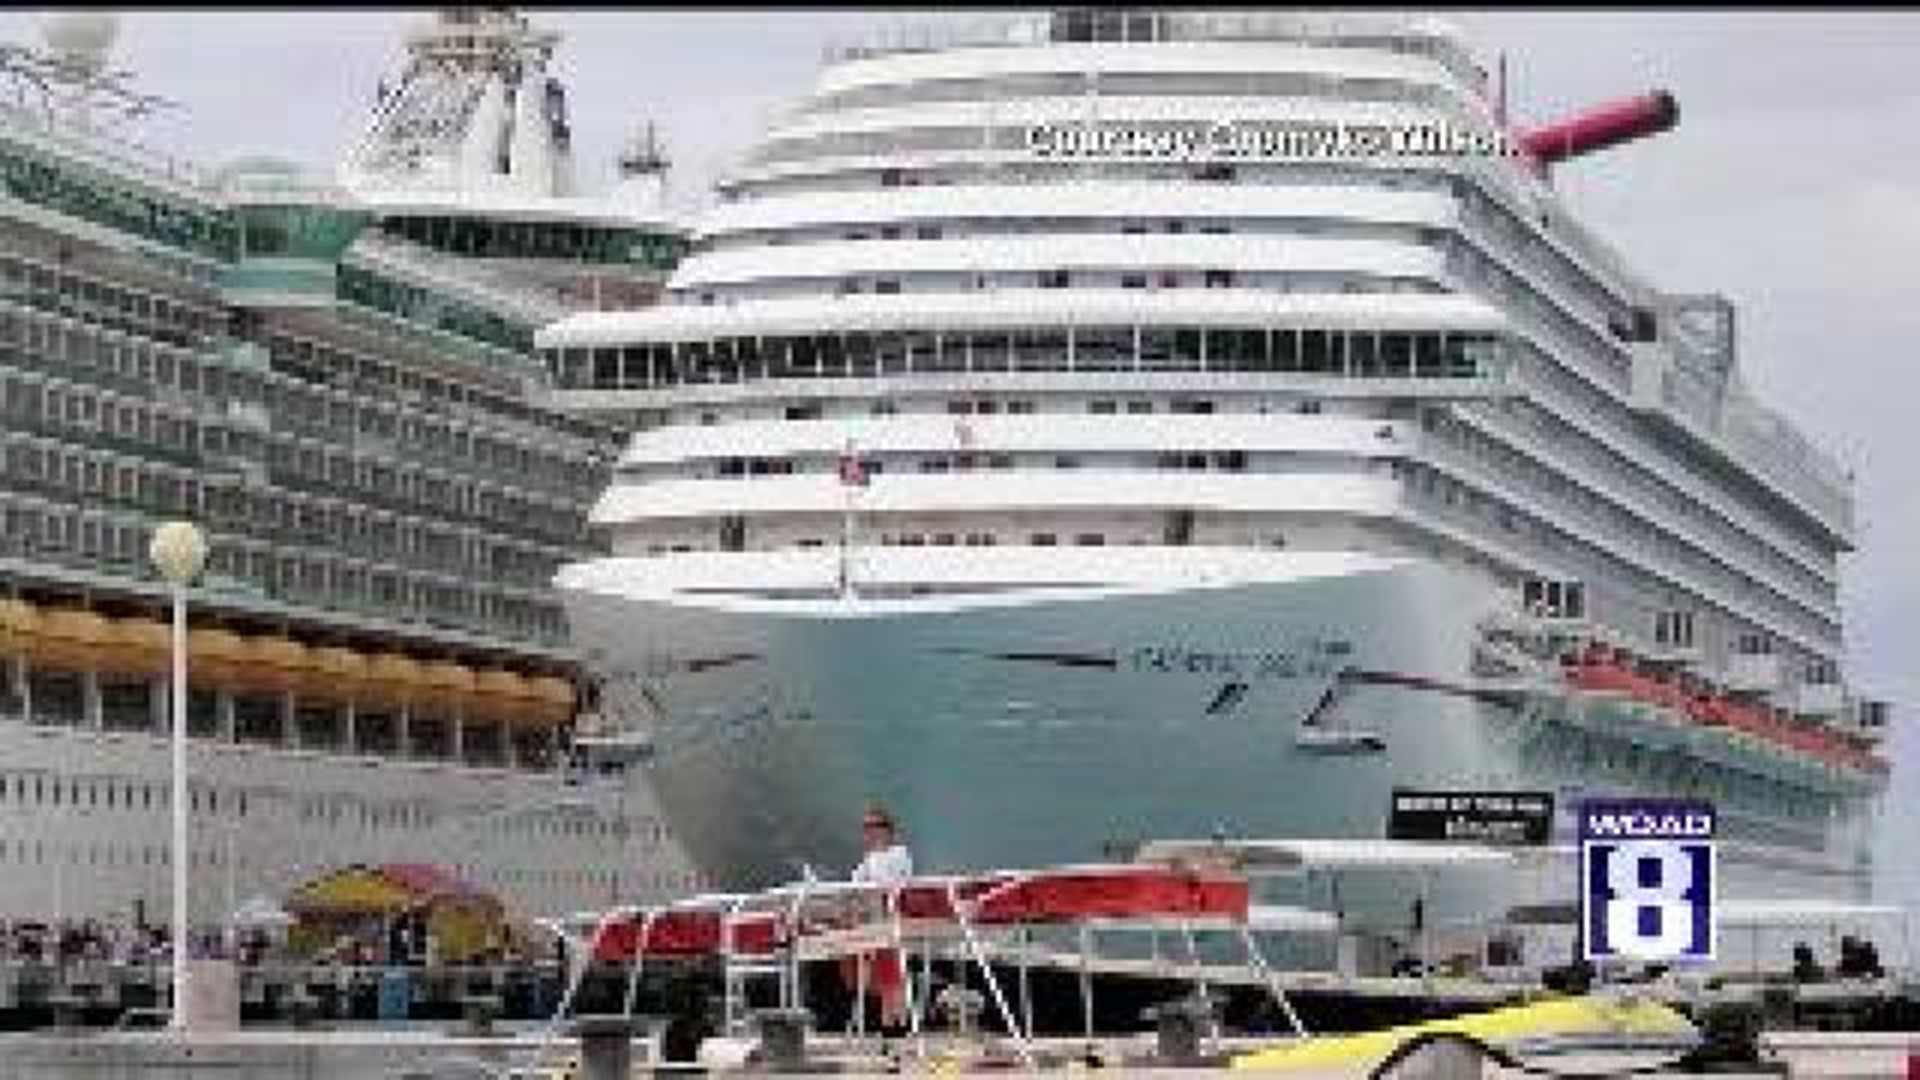 Carnival Dream Cruise Diverted